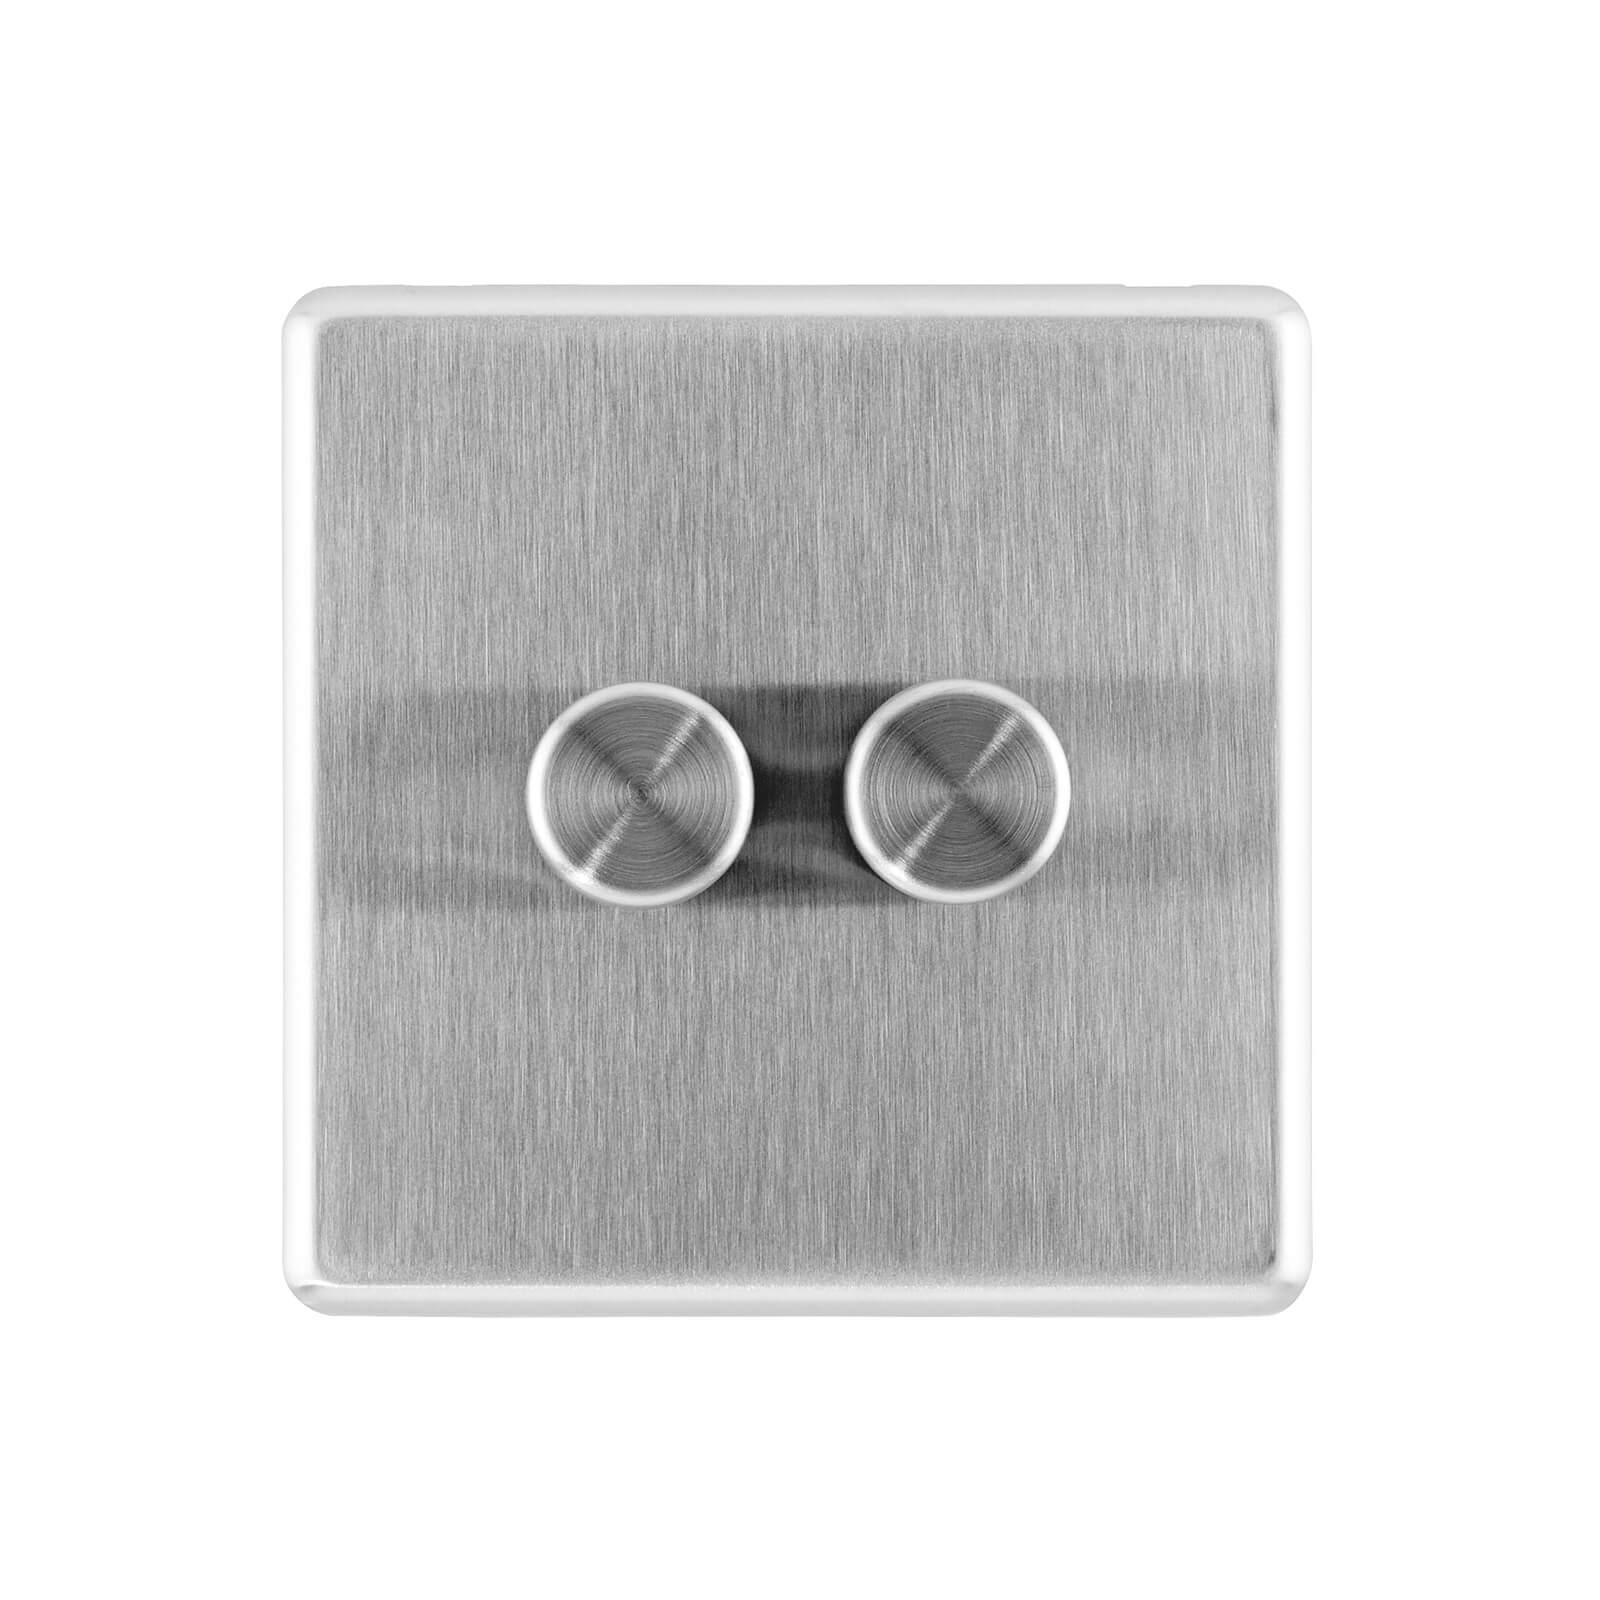 Arlec Fusion 2 Gang 2 Way Stainless Steel Dimmer switch